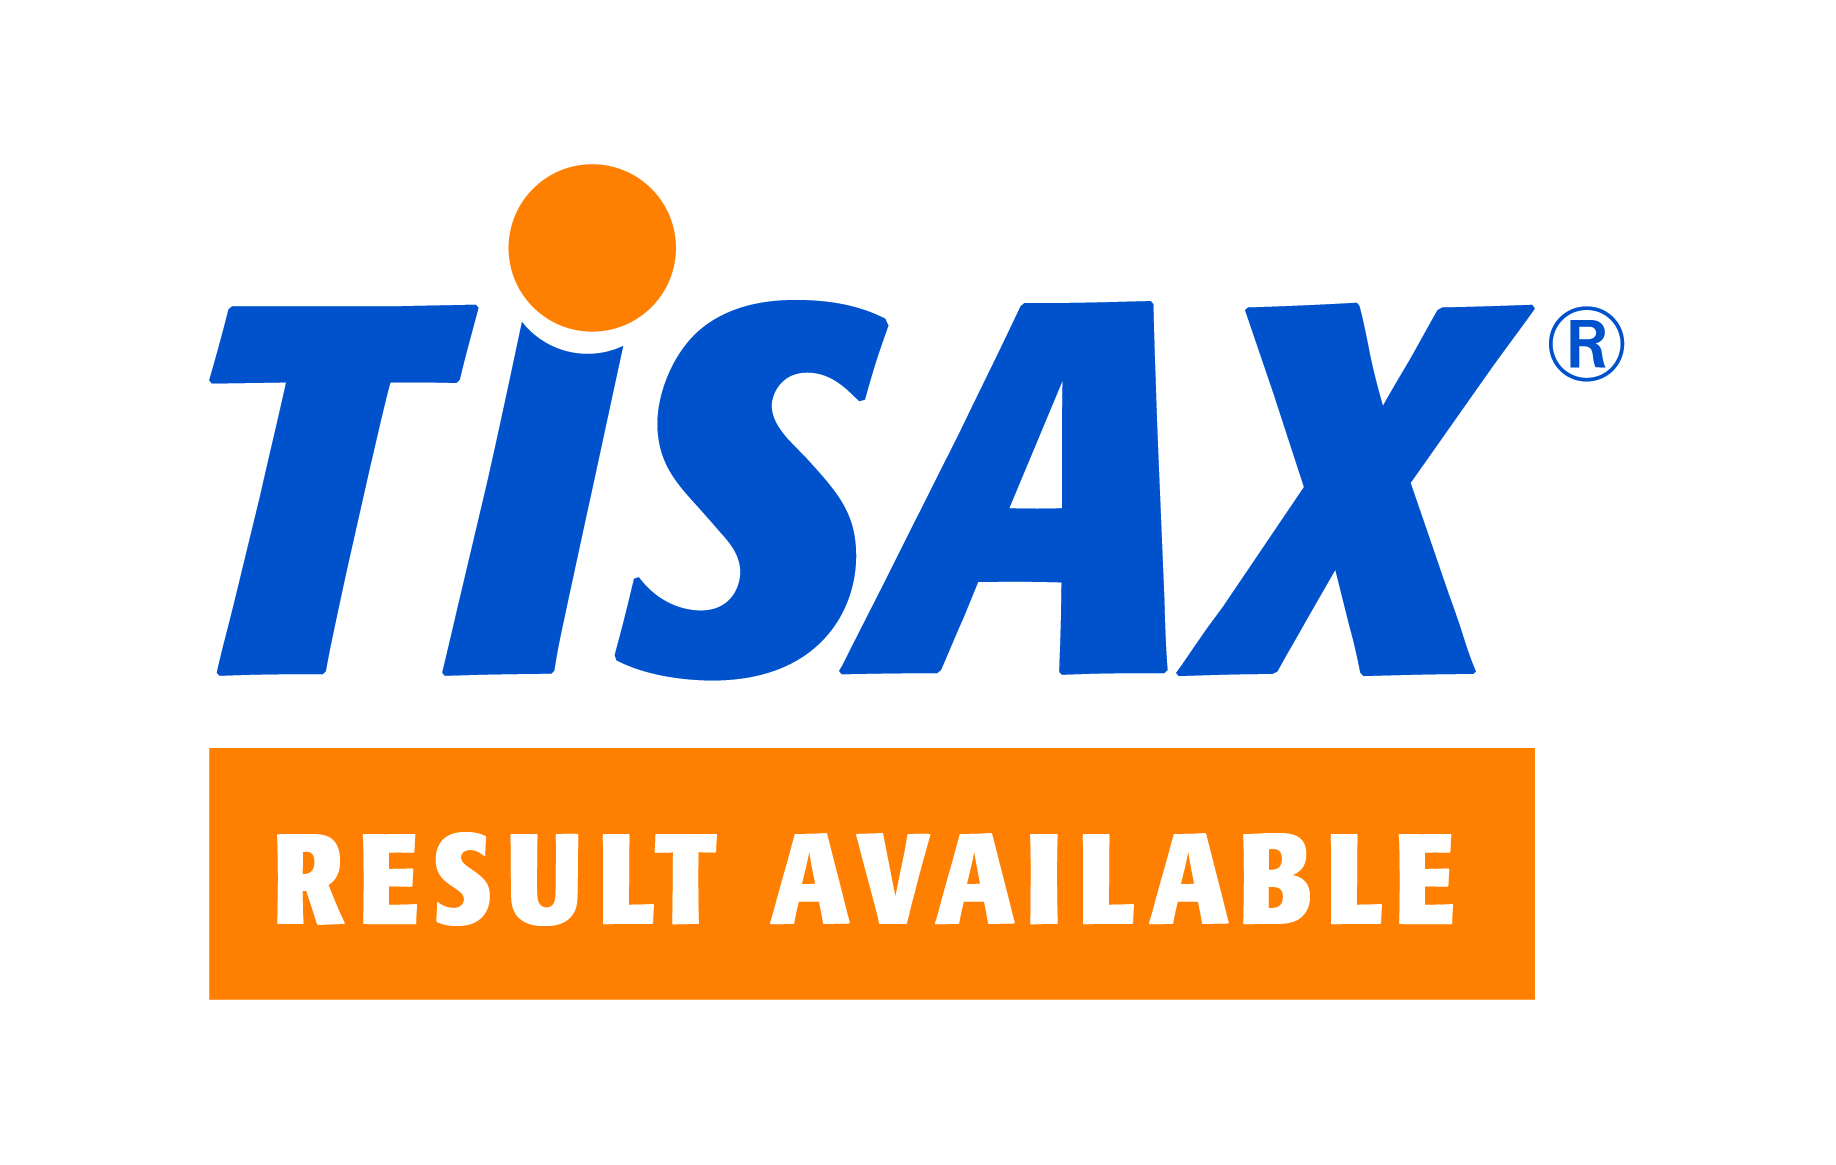 TISAX® Result availiable